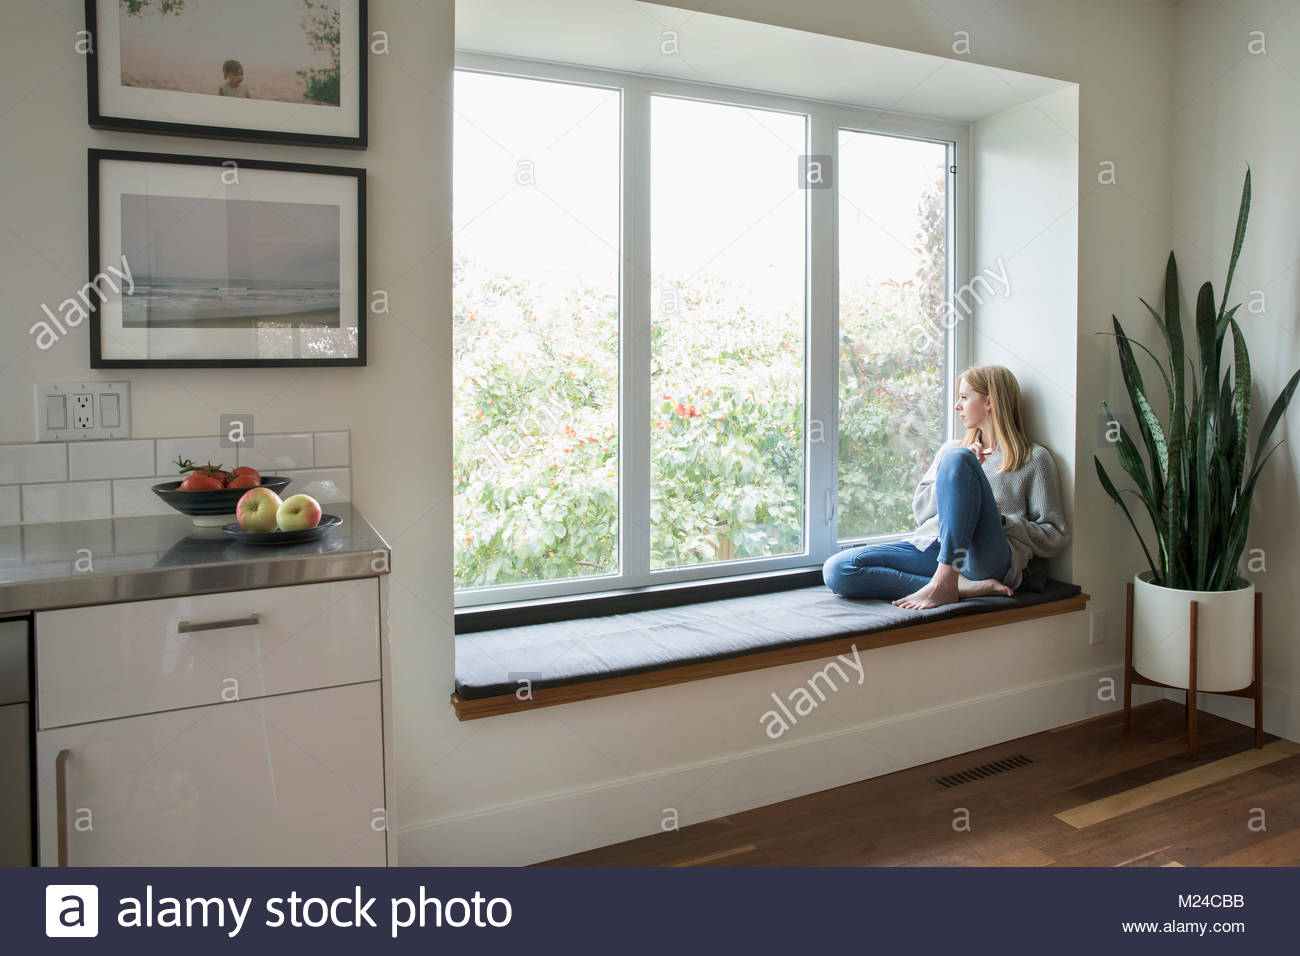 Thoughtful woman relaxing at window seat, looking out window Stock Photo